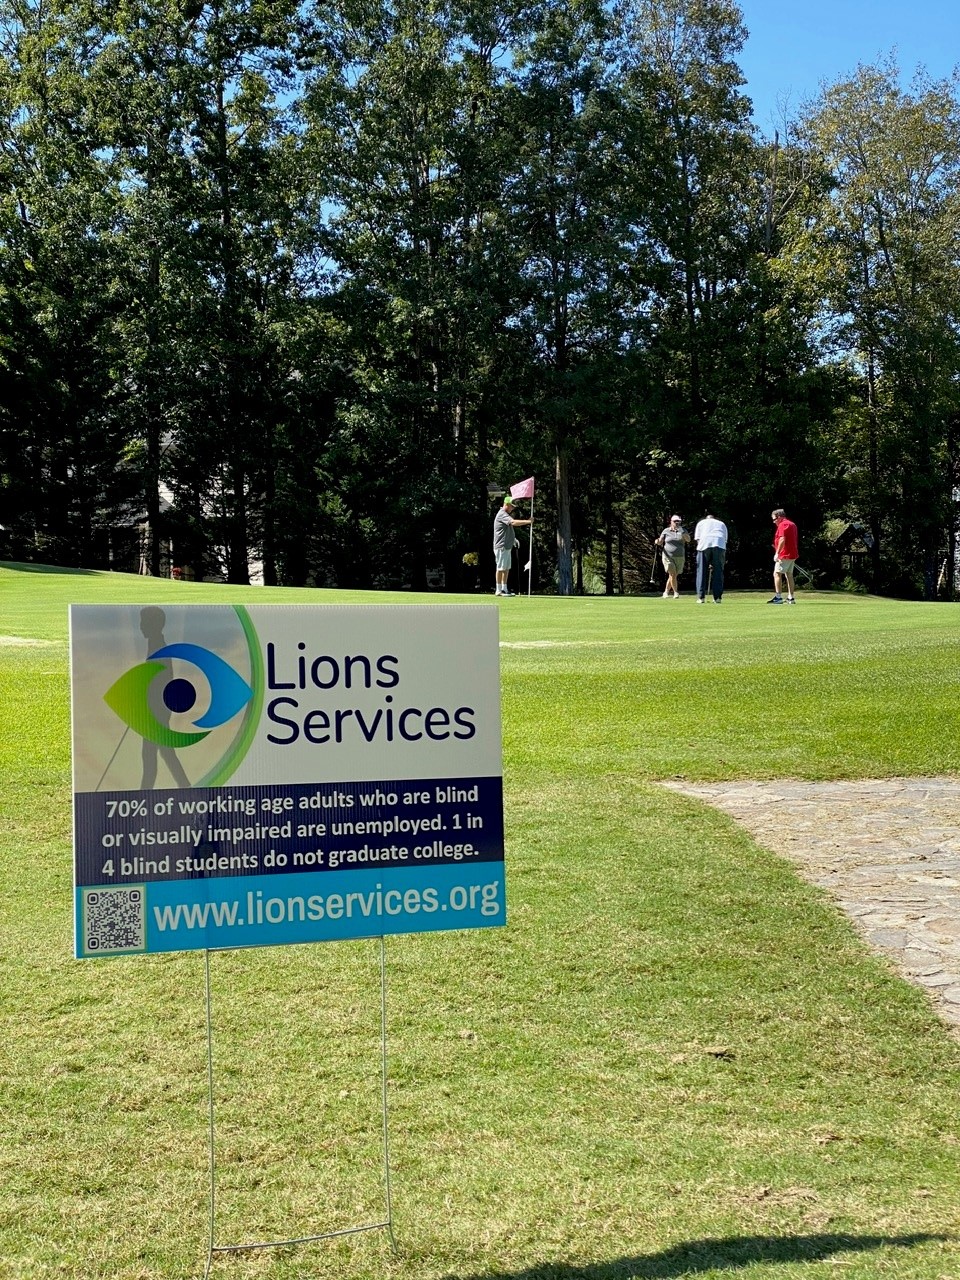 This Image Showcases A Lions Services Sign Talking about the Blind Community Workforce. 1 in 4 Blind Students Do Not Graduate College.